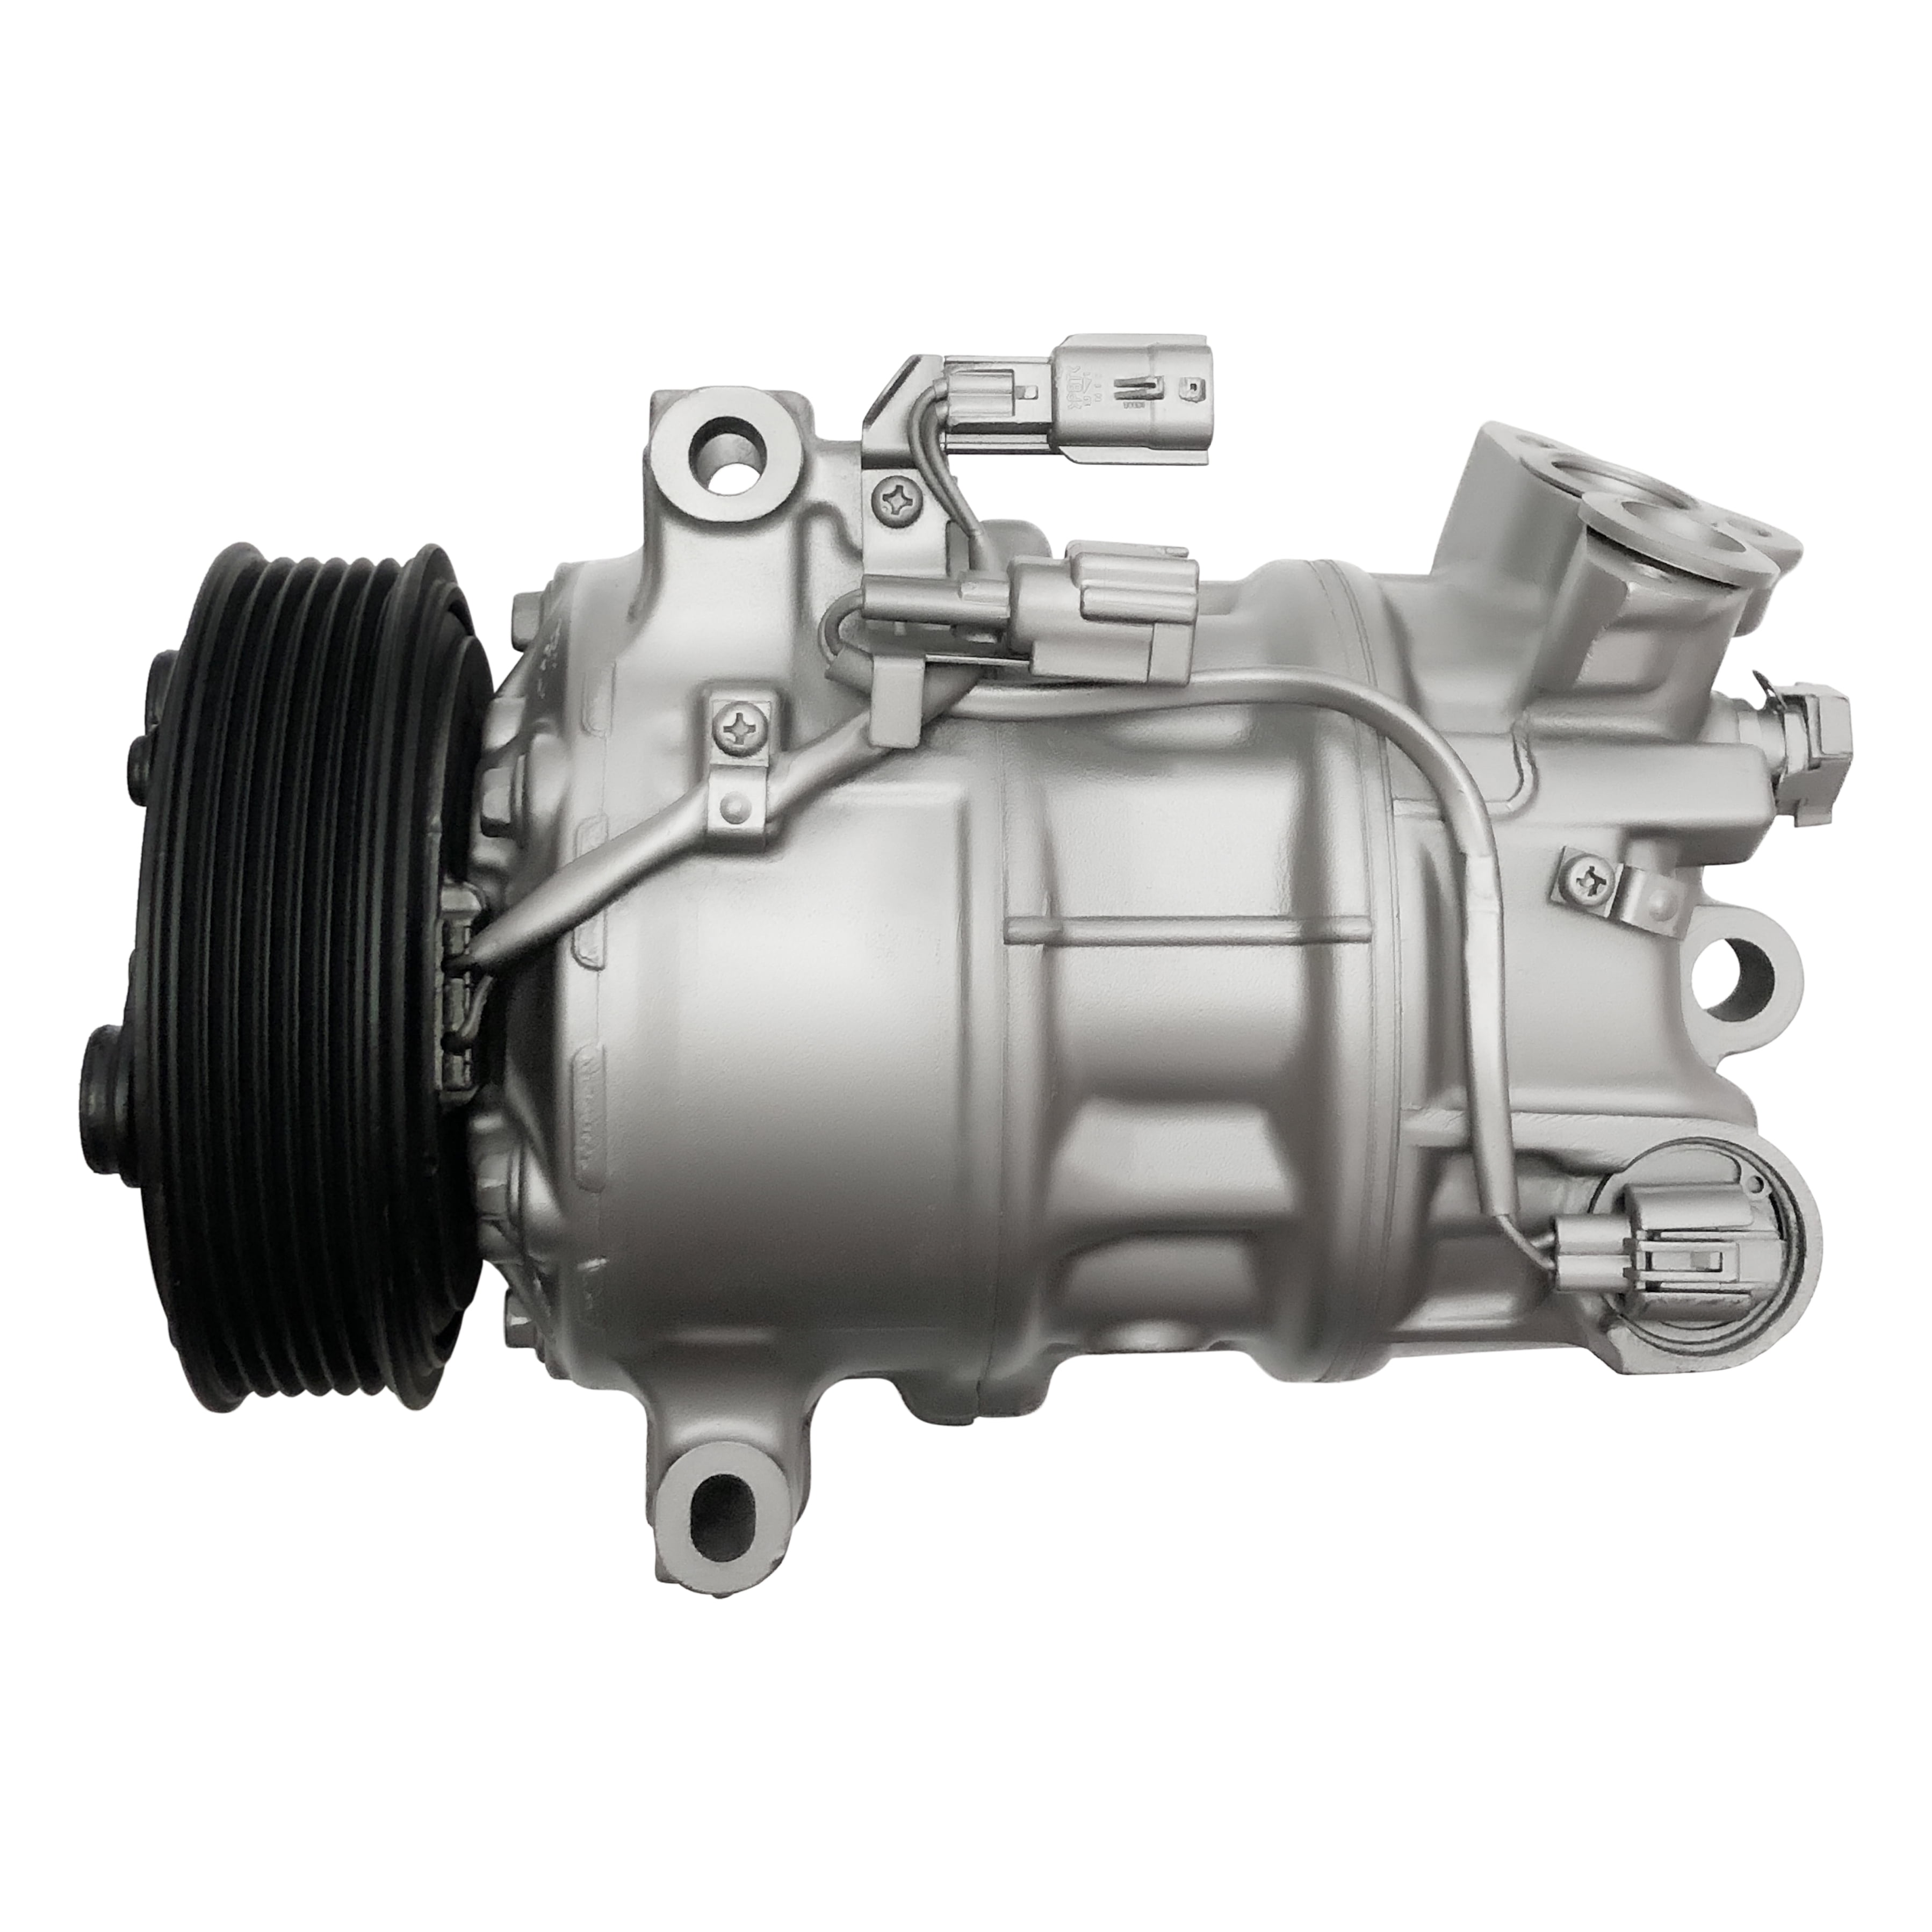 ROADFAR Air Conditioning Compressor fit for CO 10609JC 2000-2006 for N-issan Sentra 1.8L 